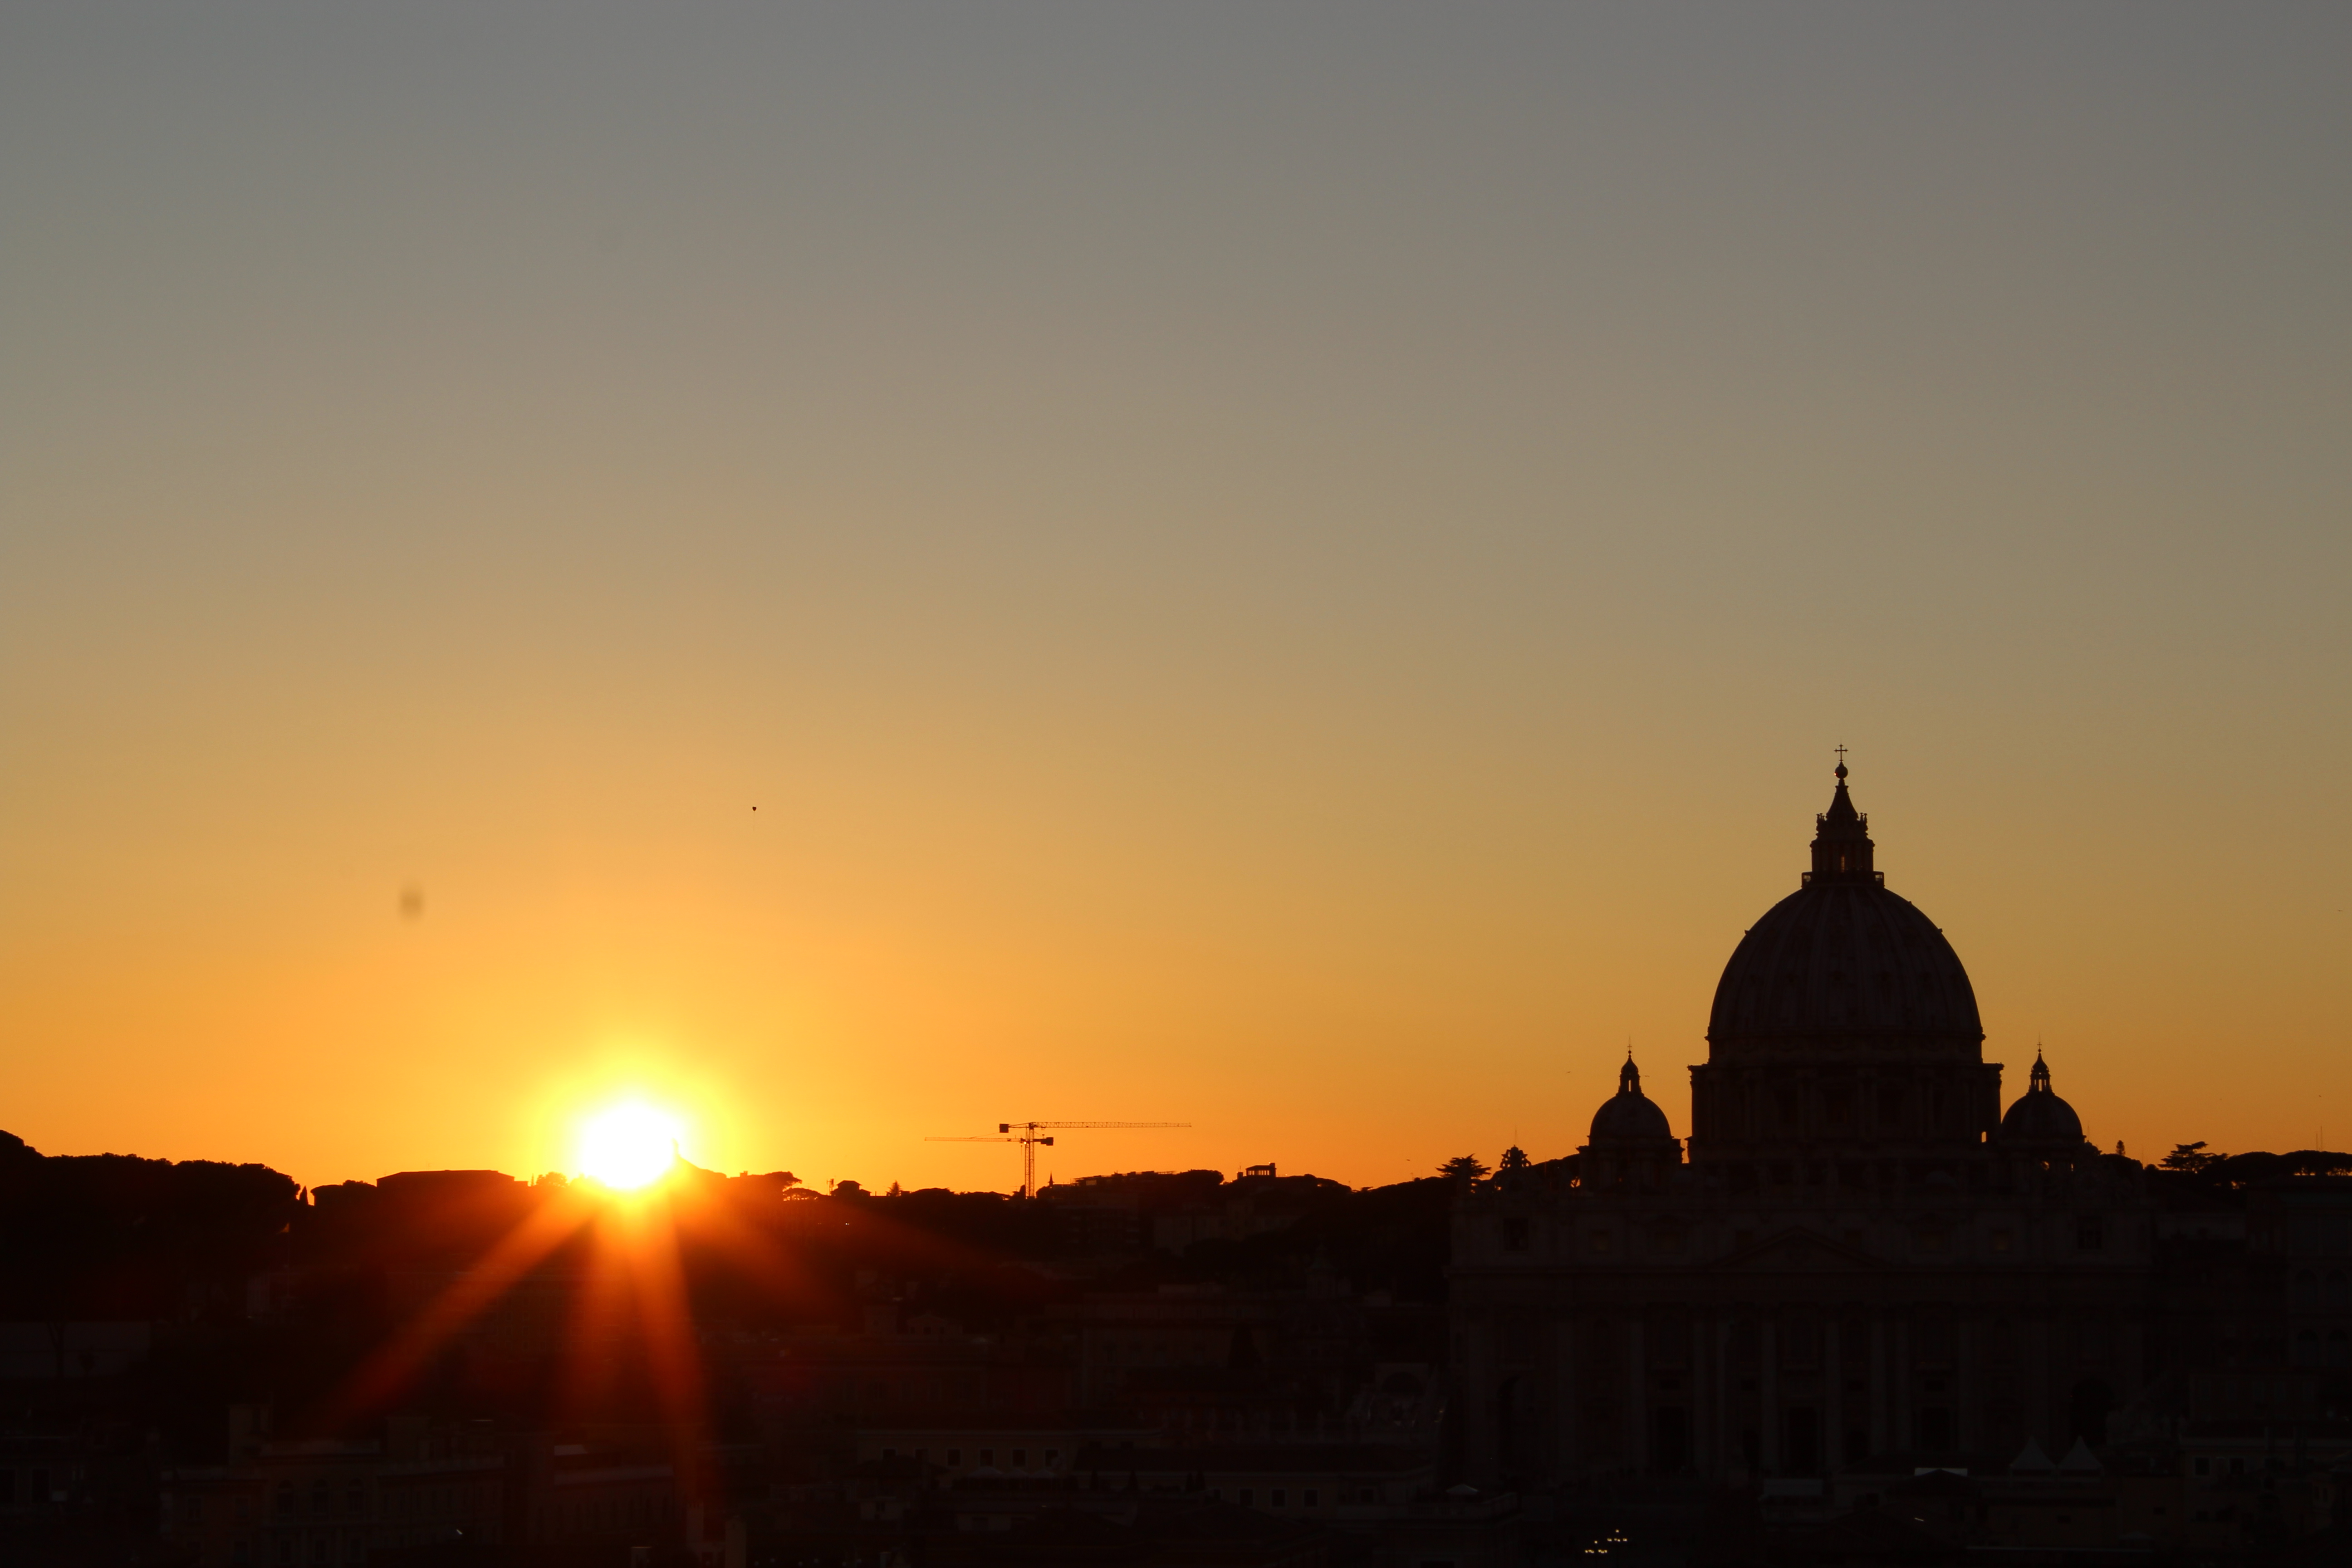 Sunset wit St. Peter's dome on the horizon